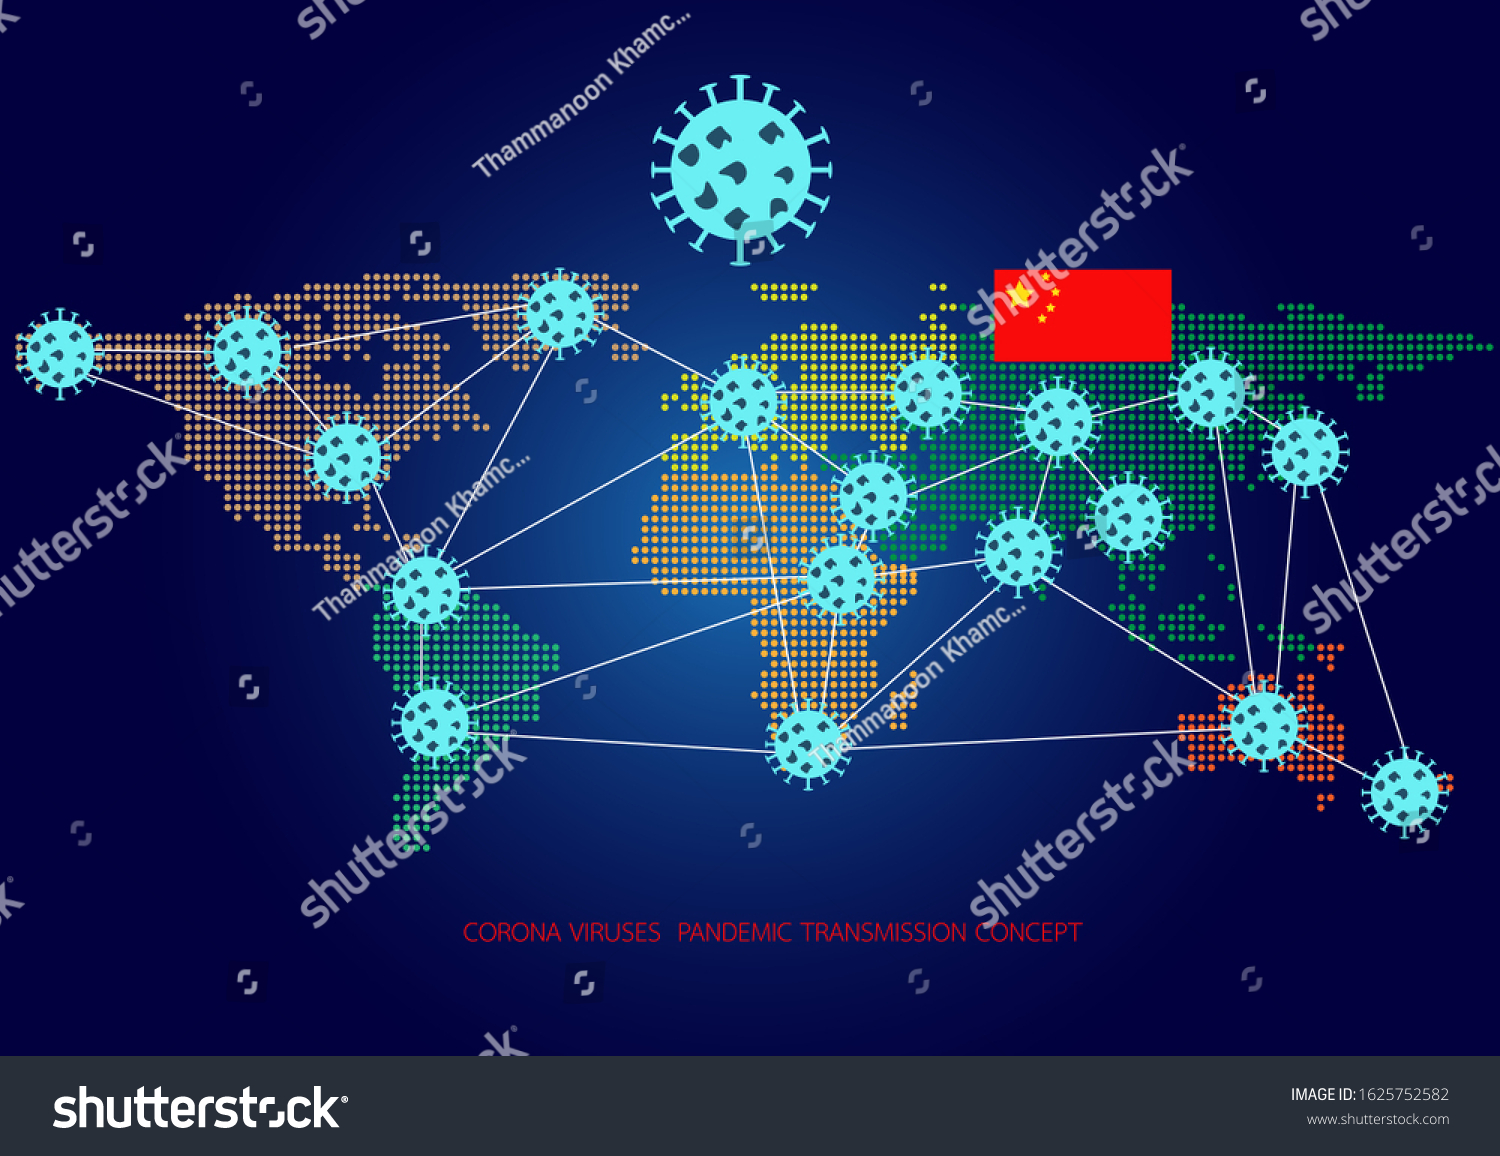 Novel Coronavirus ,icon of departure of coronavirus from China and Transmitted worldwide Pandemic concept of international contamination with biologically weapons.Vector illustration EPS 10. #1625752582